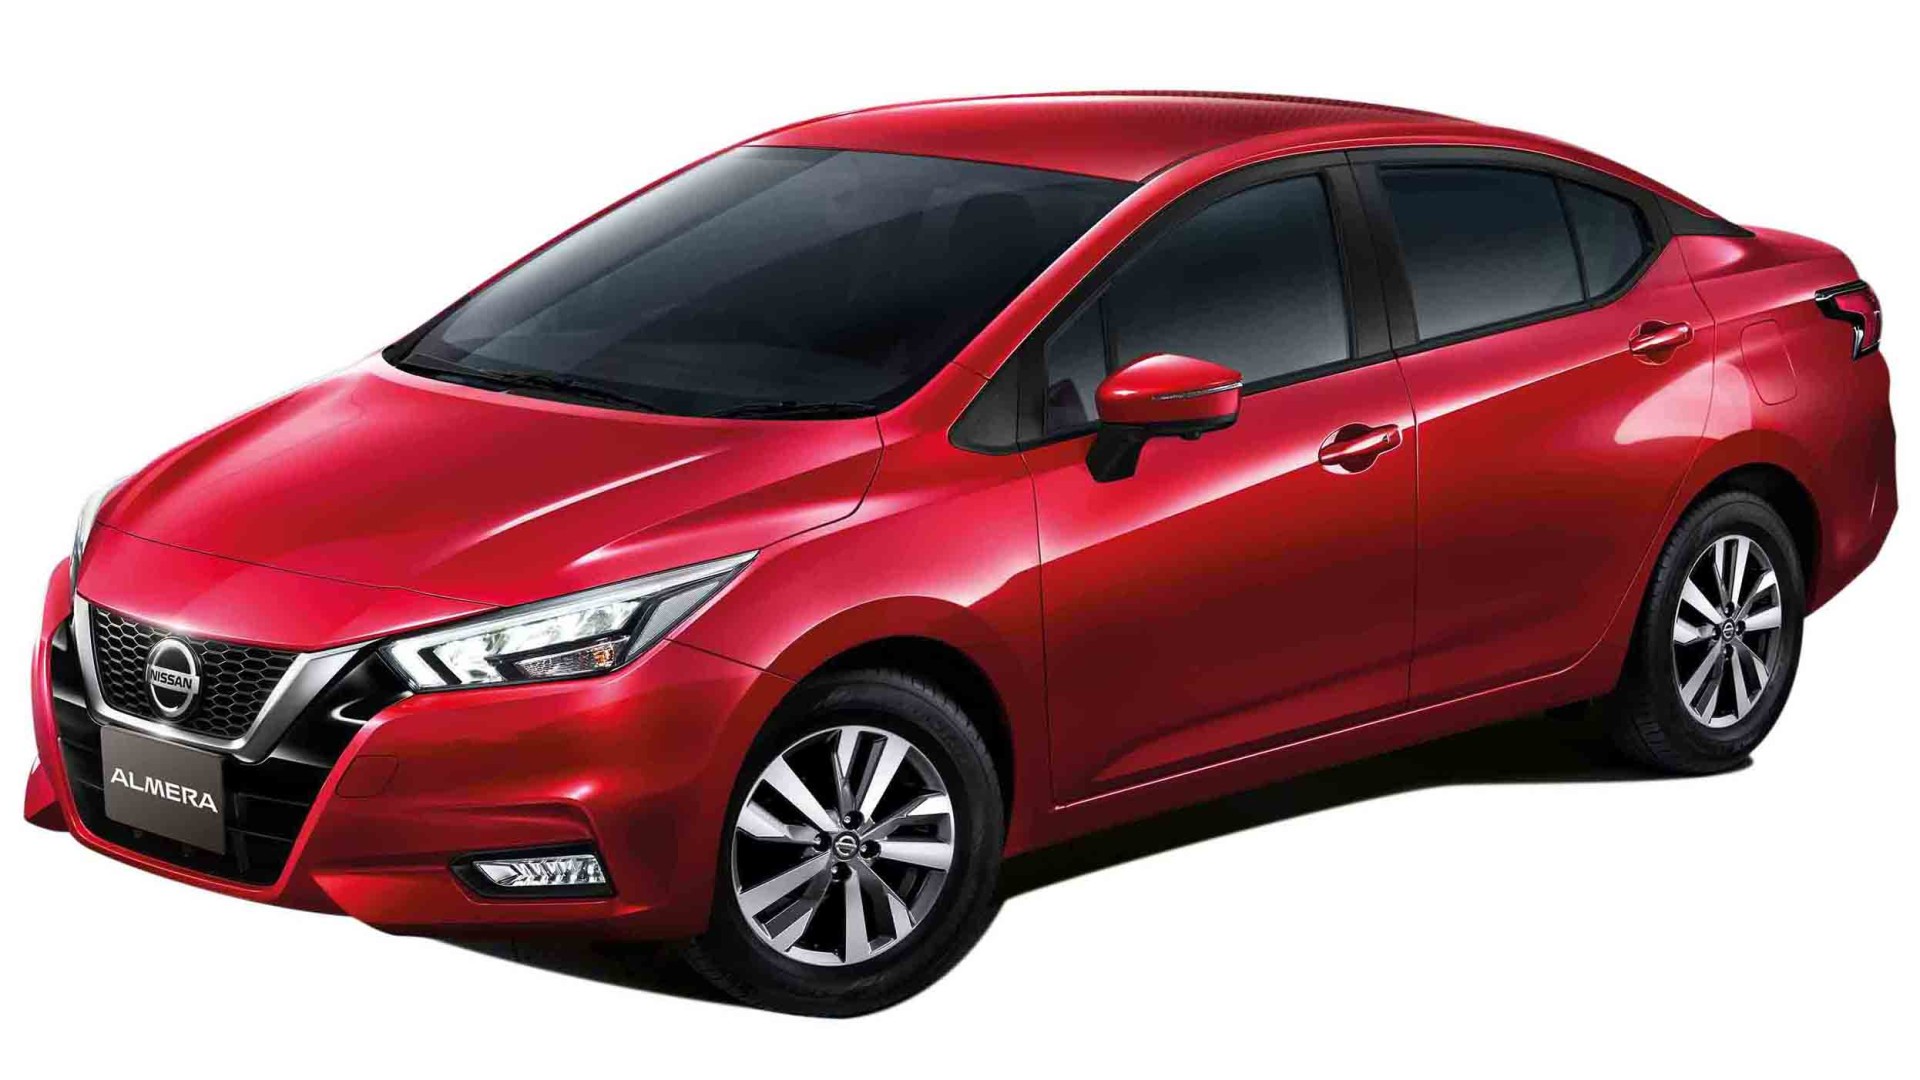 Nissan Almera N18 (2020) Exterior Image #71958 in Malaysia  Reviews